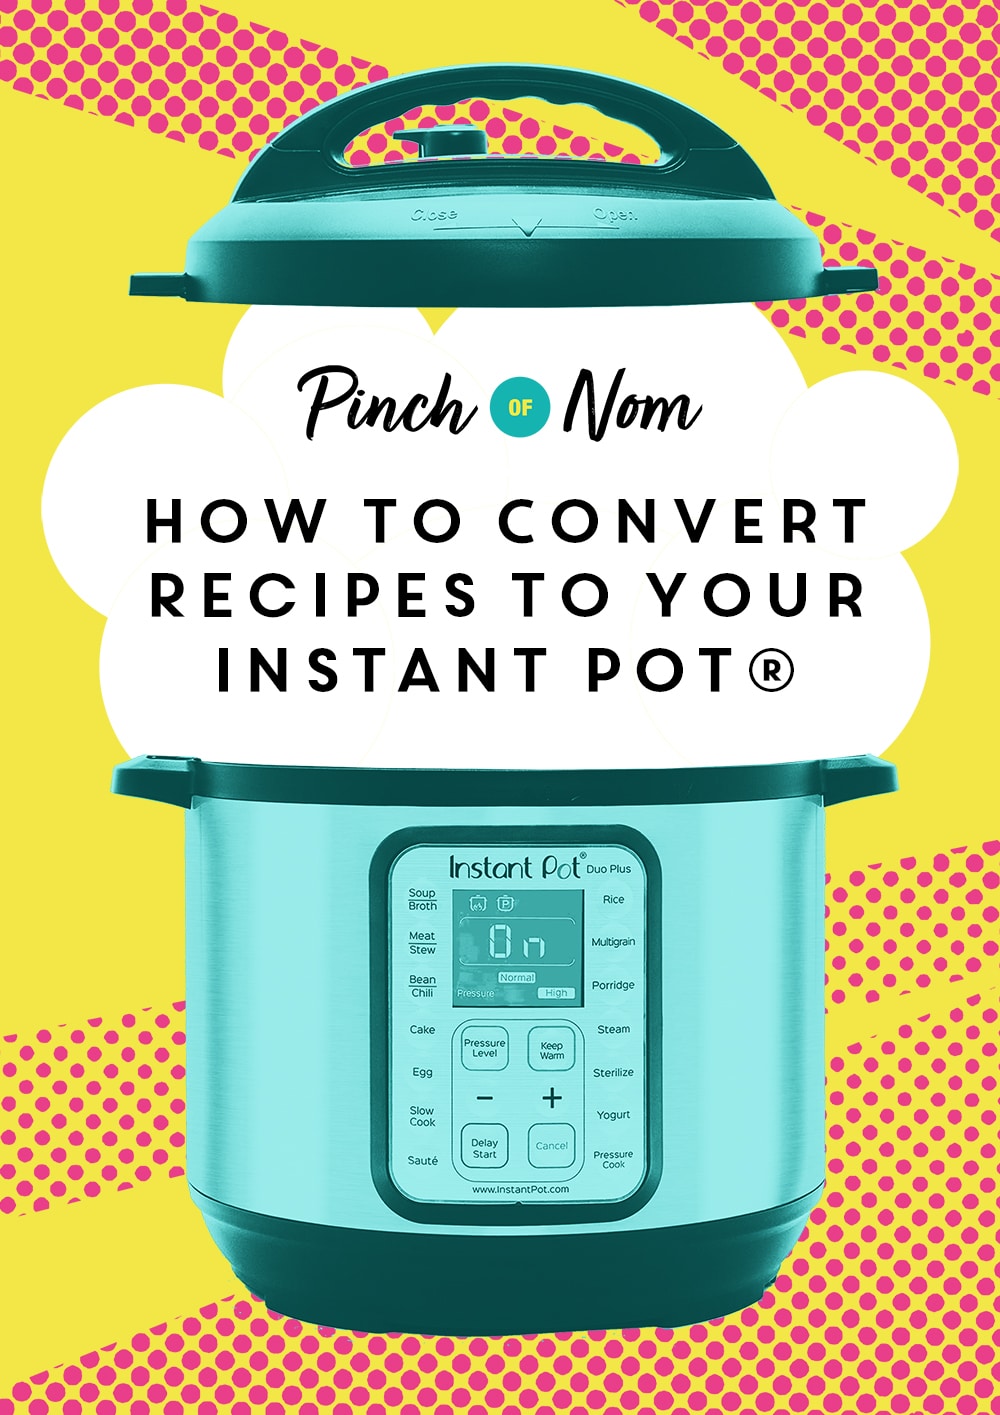 How to Convert Recipes to your Instant Pot - Pinch of Nom Slimming Recipes